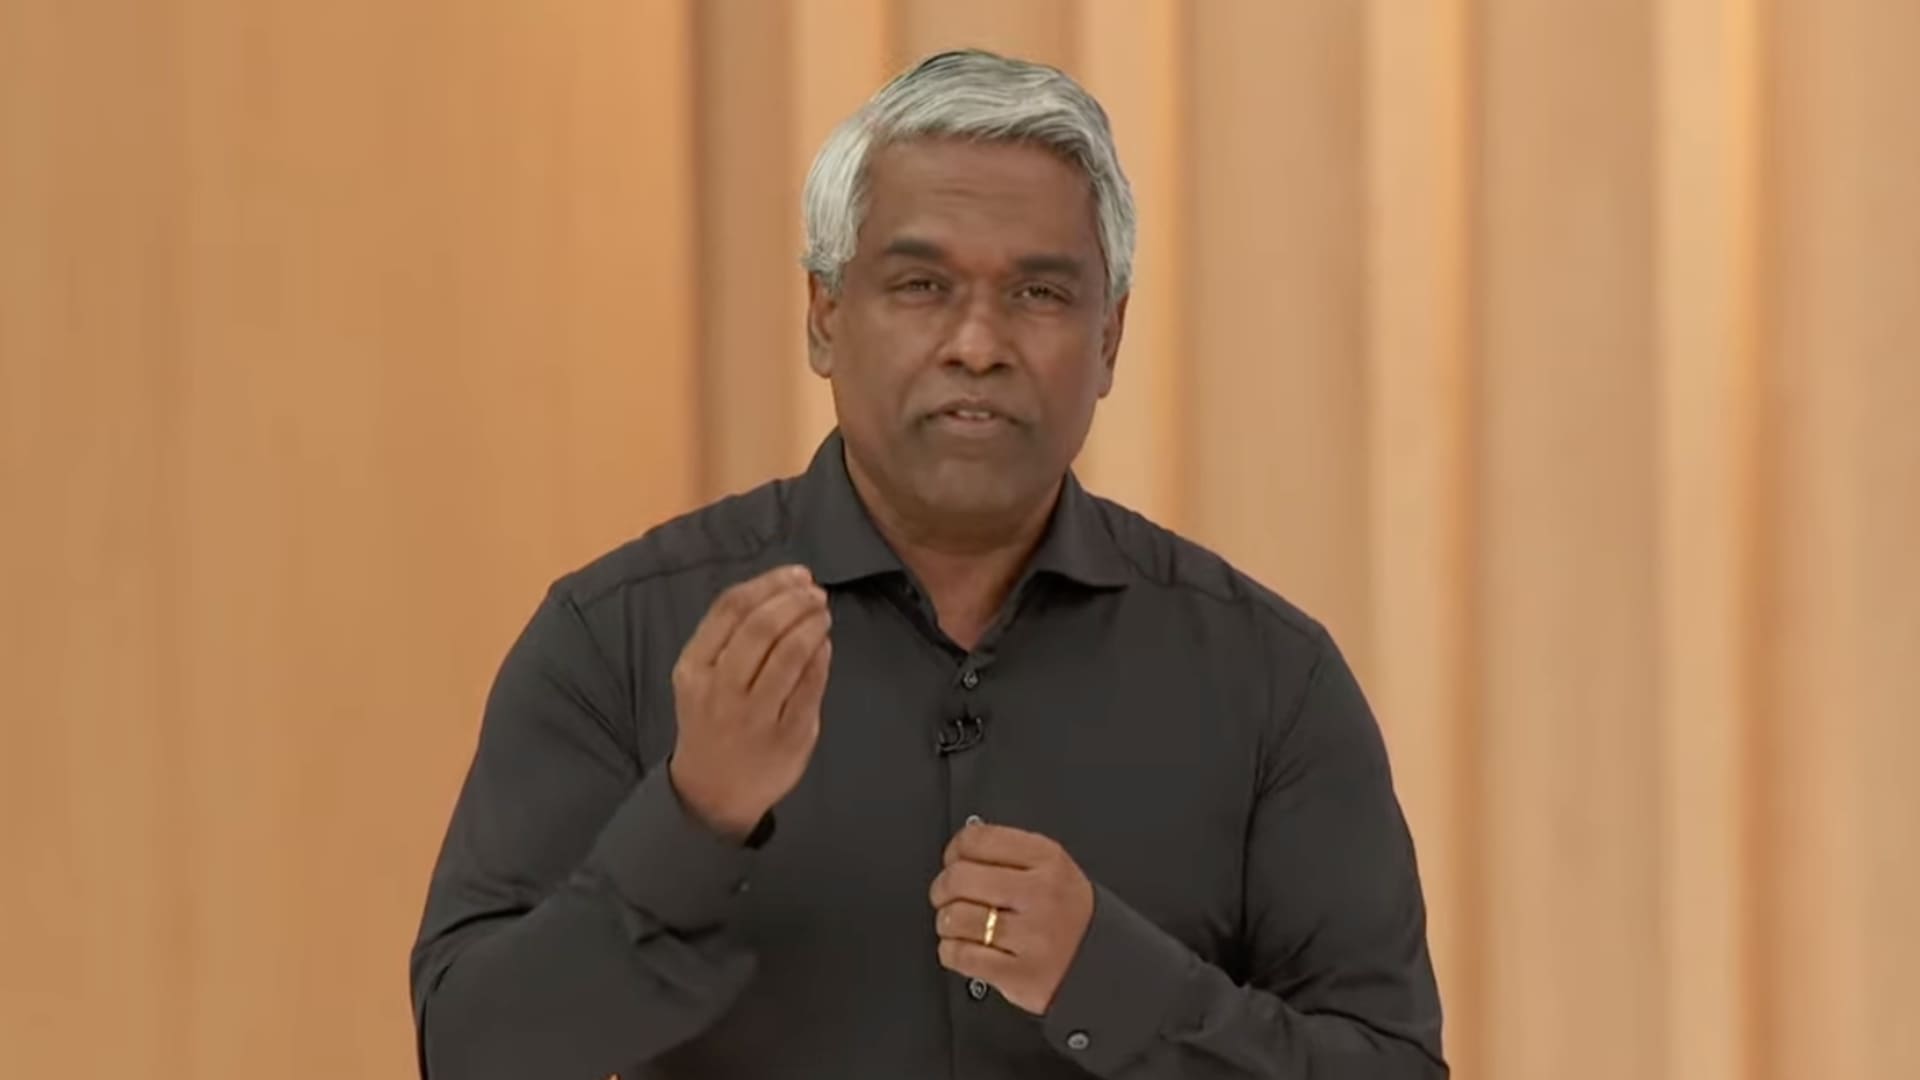 Thomas Kurian presents at the Google's I/O Developer's Conference in Mountain View, Calif, on May 10, 2023.